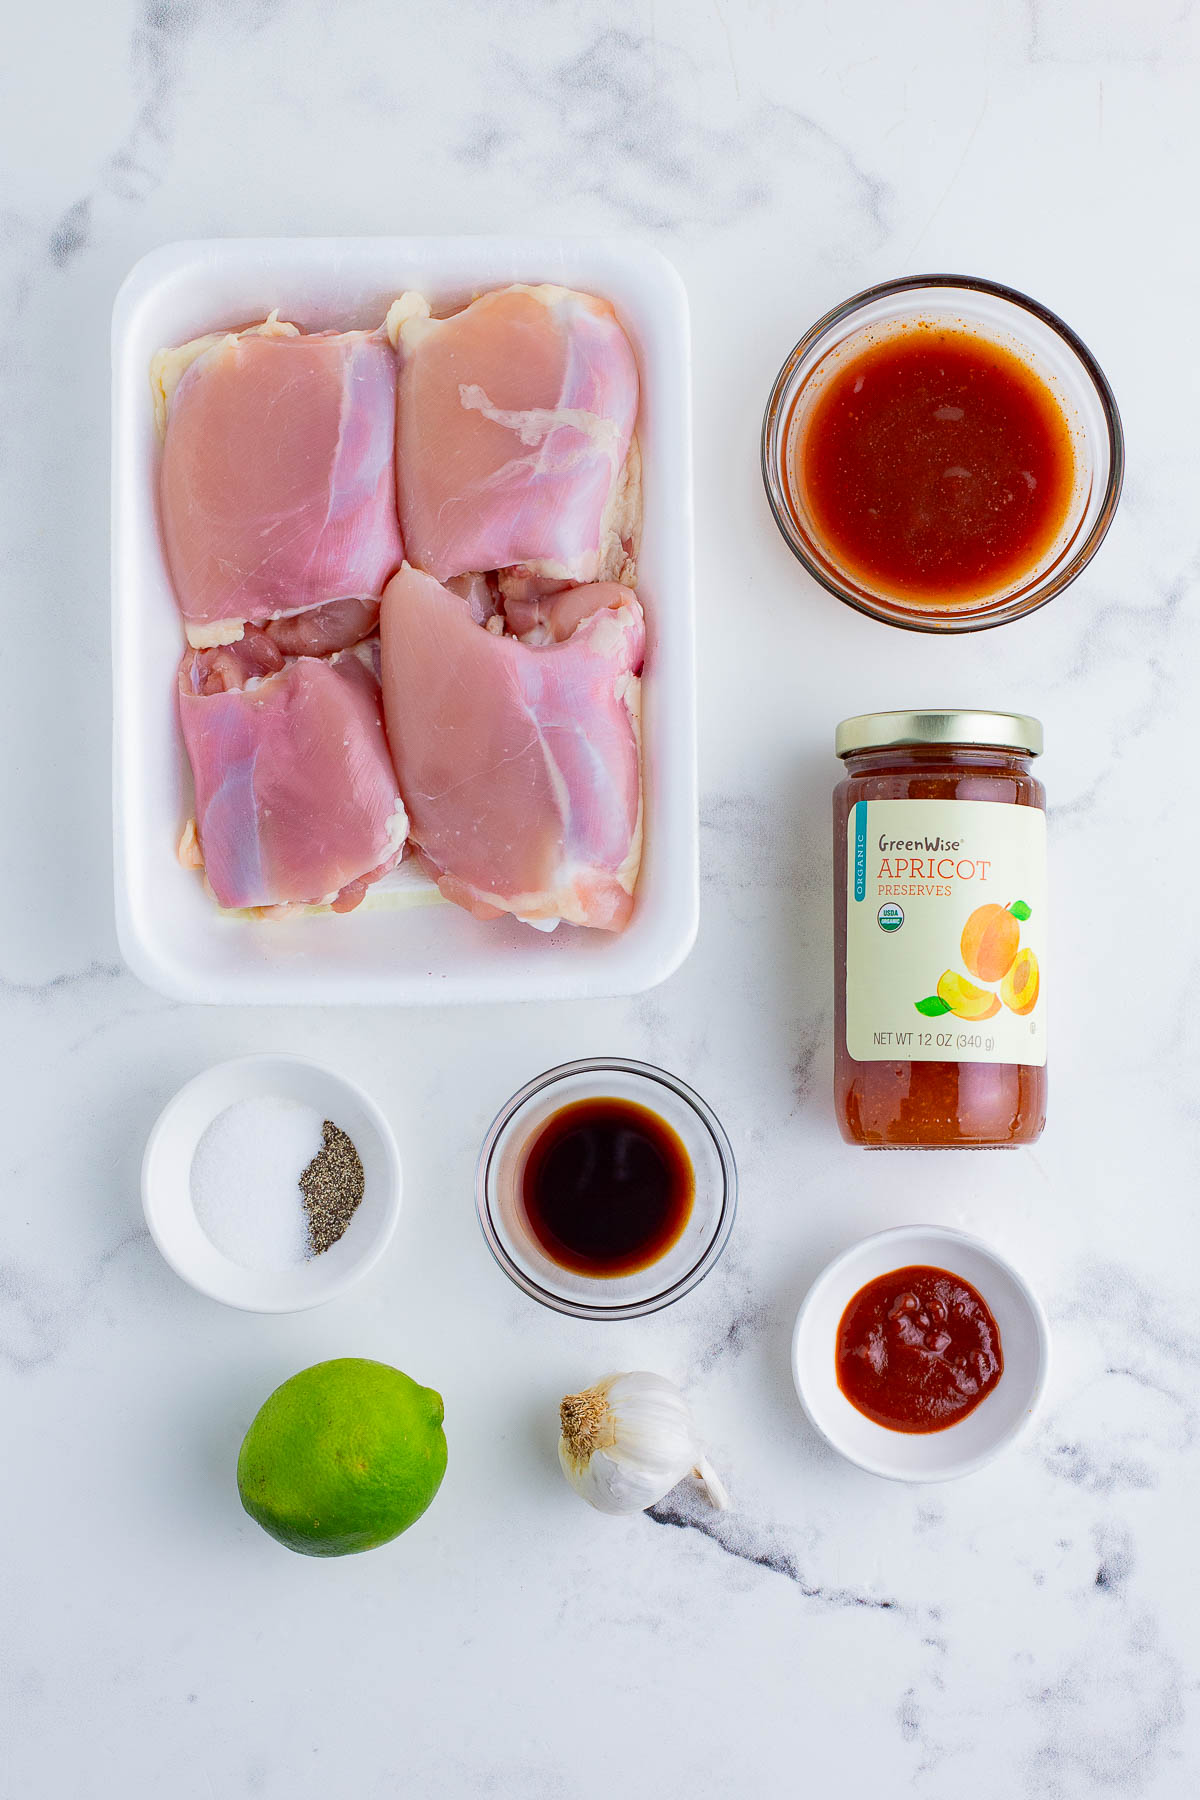 Chicken thighs, bbq sauce, apricot preserves, and seasonings are the ingredients for this dish.